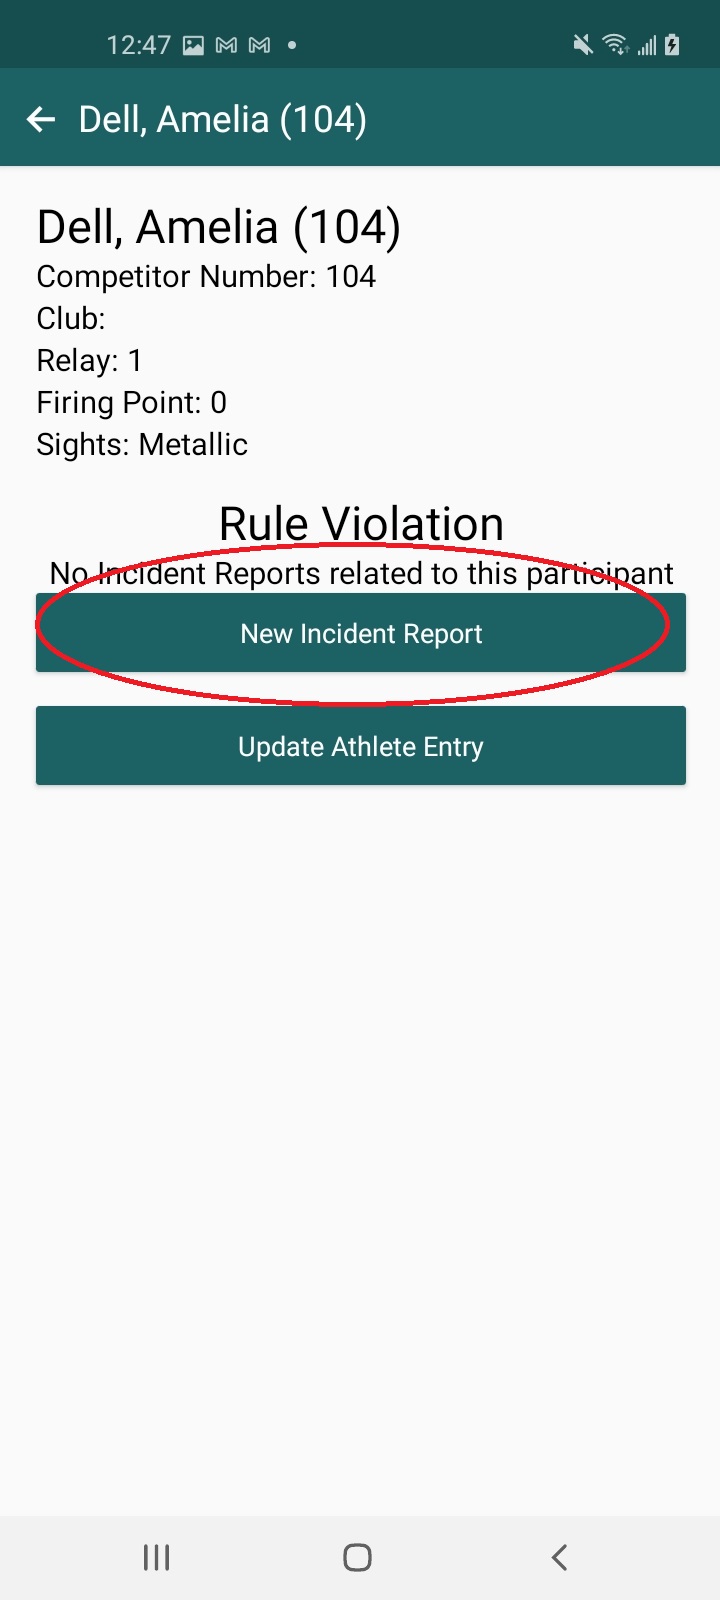 Submit Incident Report circled